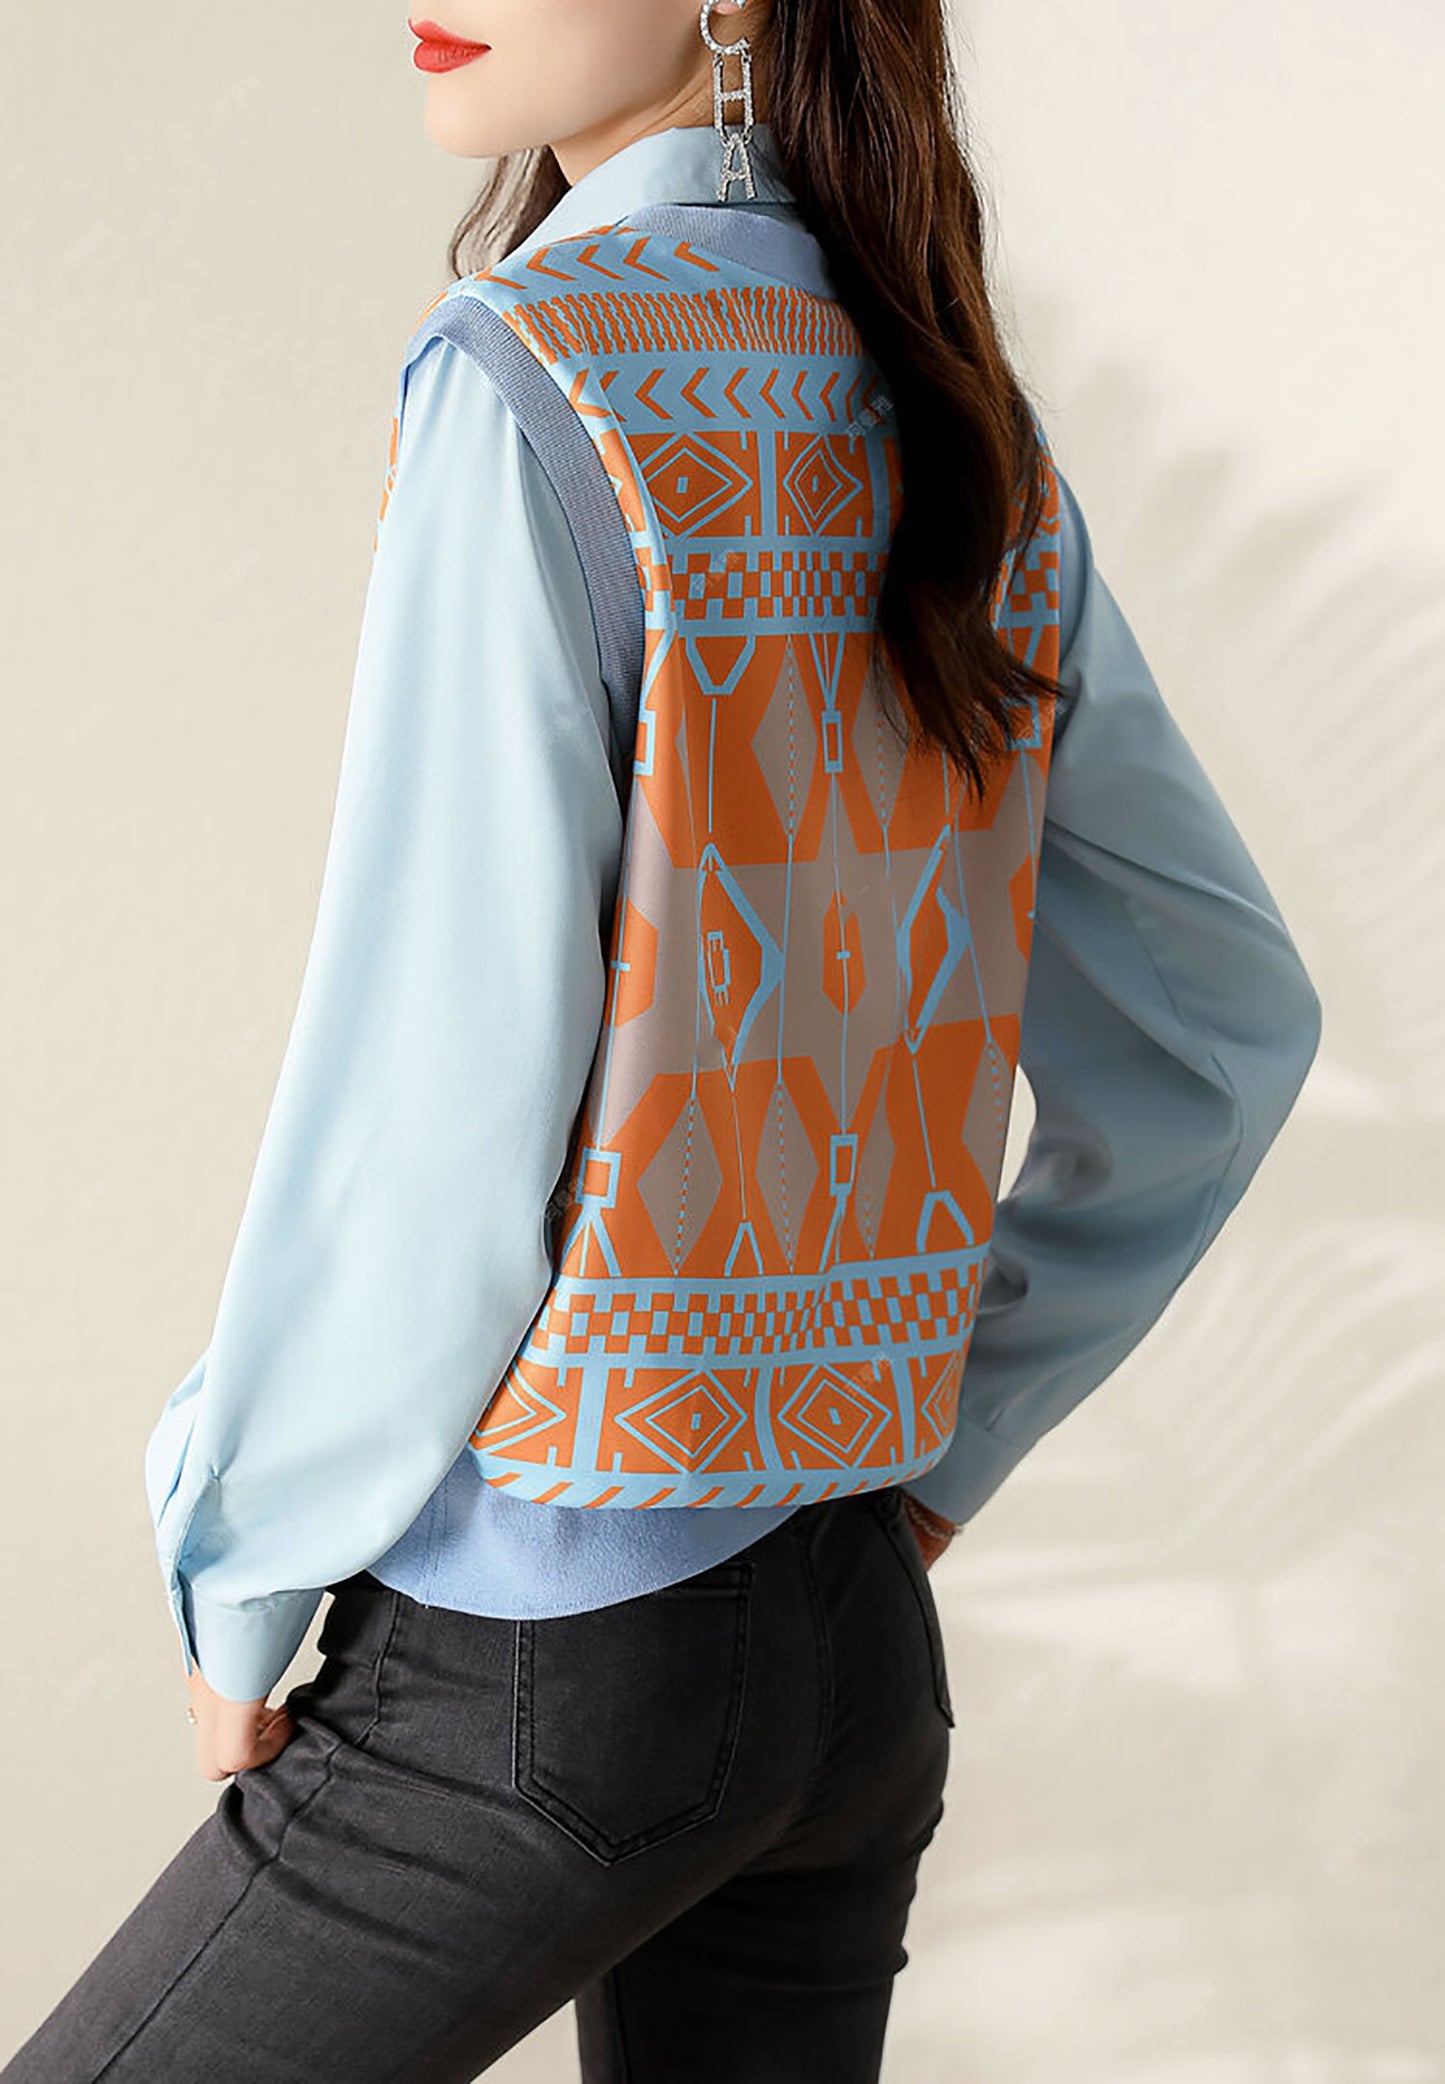 Collar Neck Long Sleeves Patchwork Solid Blouse